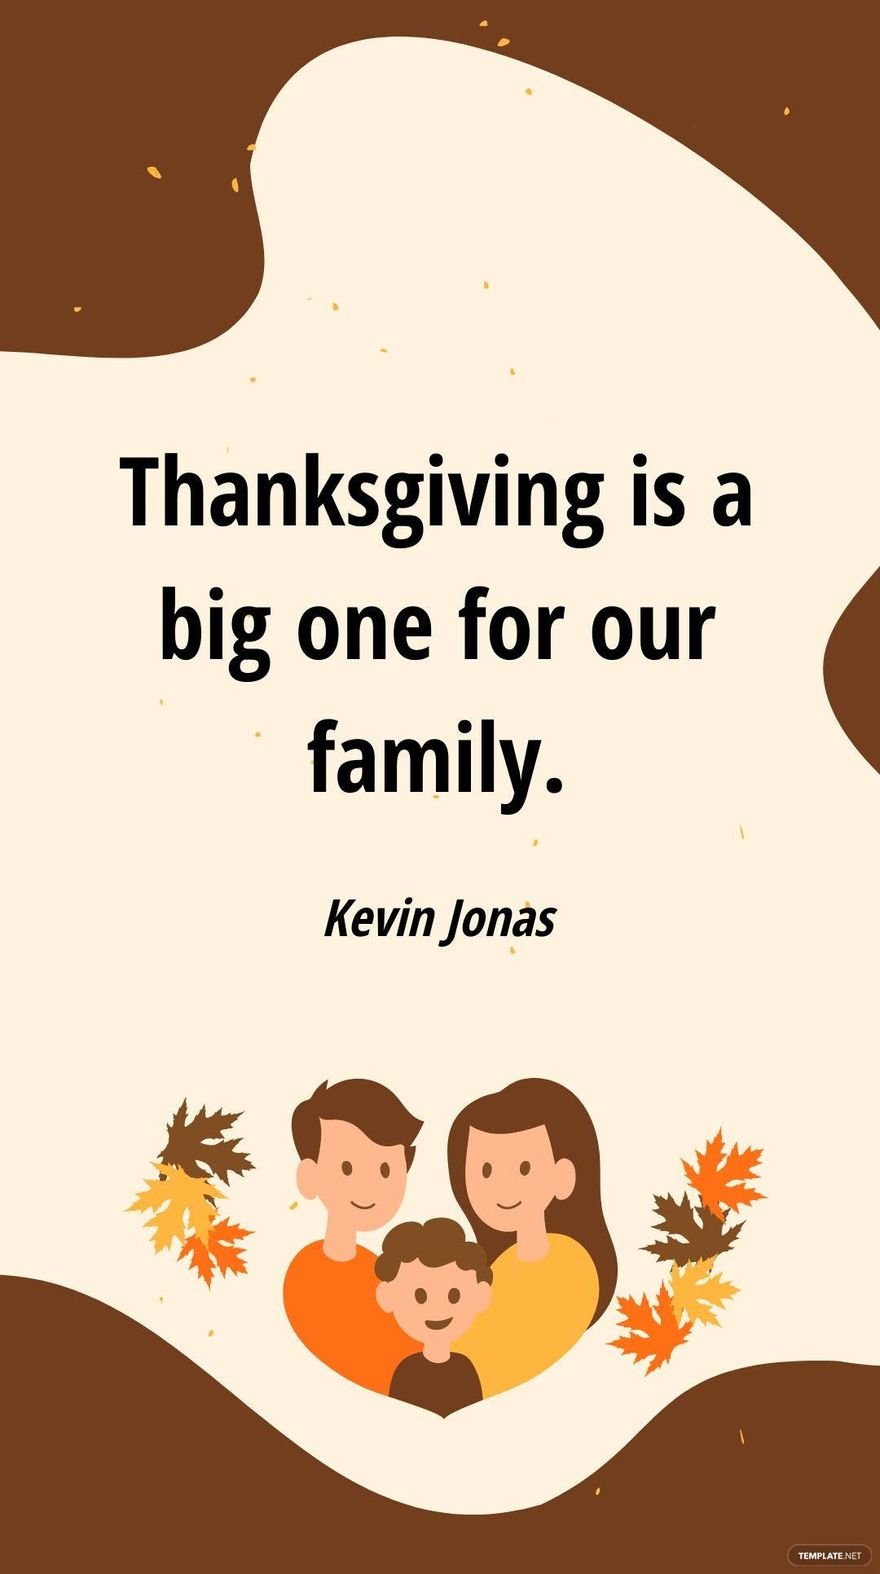 Free Kevin Jonas - Thanksgiving is a big one for our family. in JPG